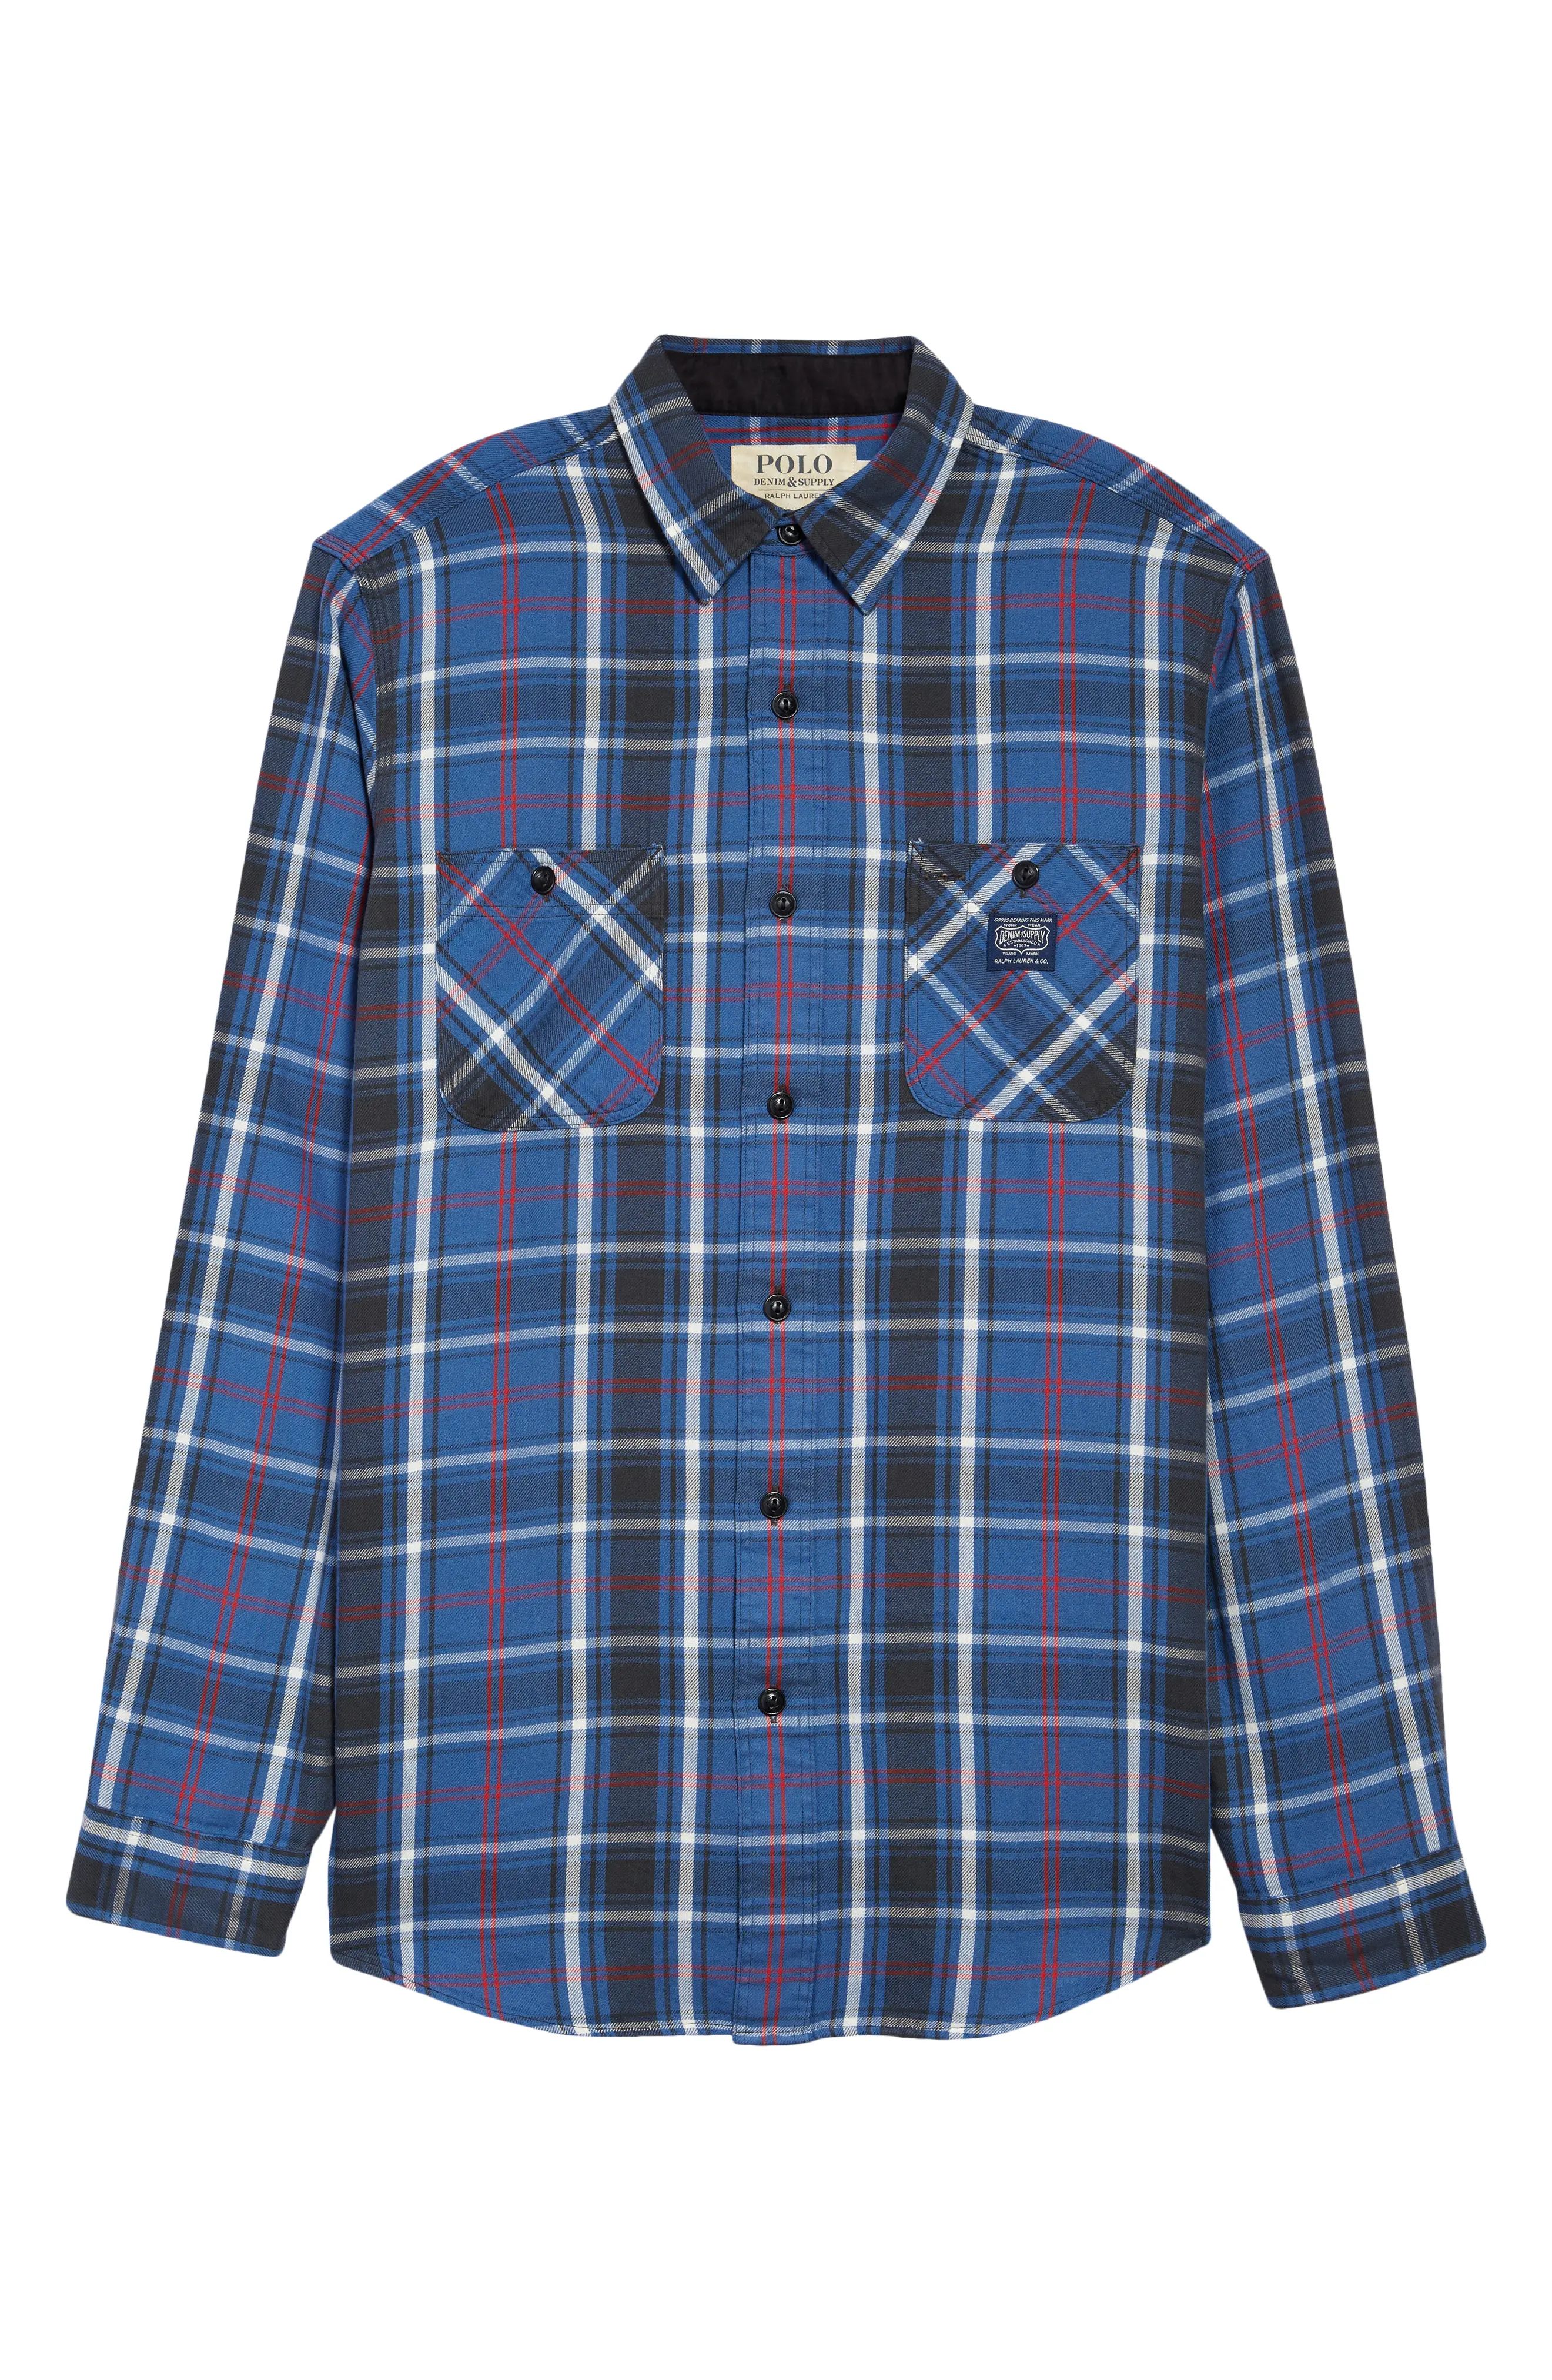 Polo Ralph Lauren Men's Plaid Twill Button-Up Shirt in Blue/Red Multi at Nordstrom, Size Medium | Nordstrom